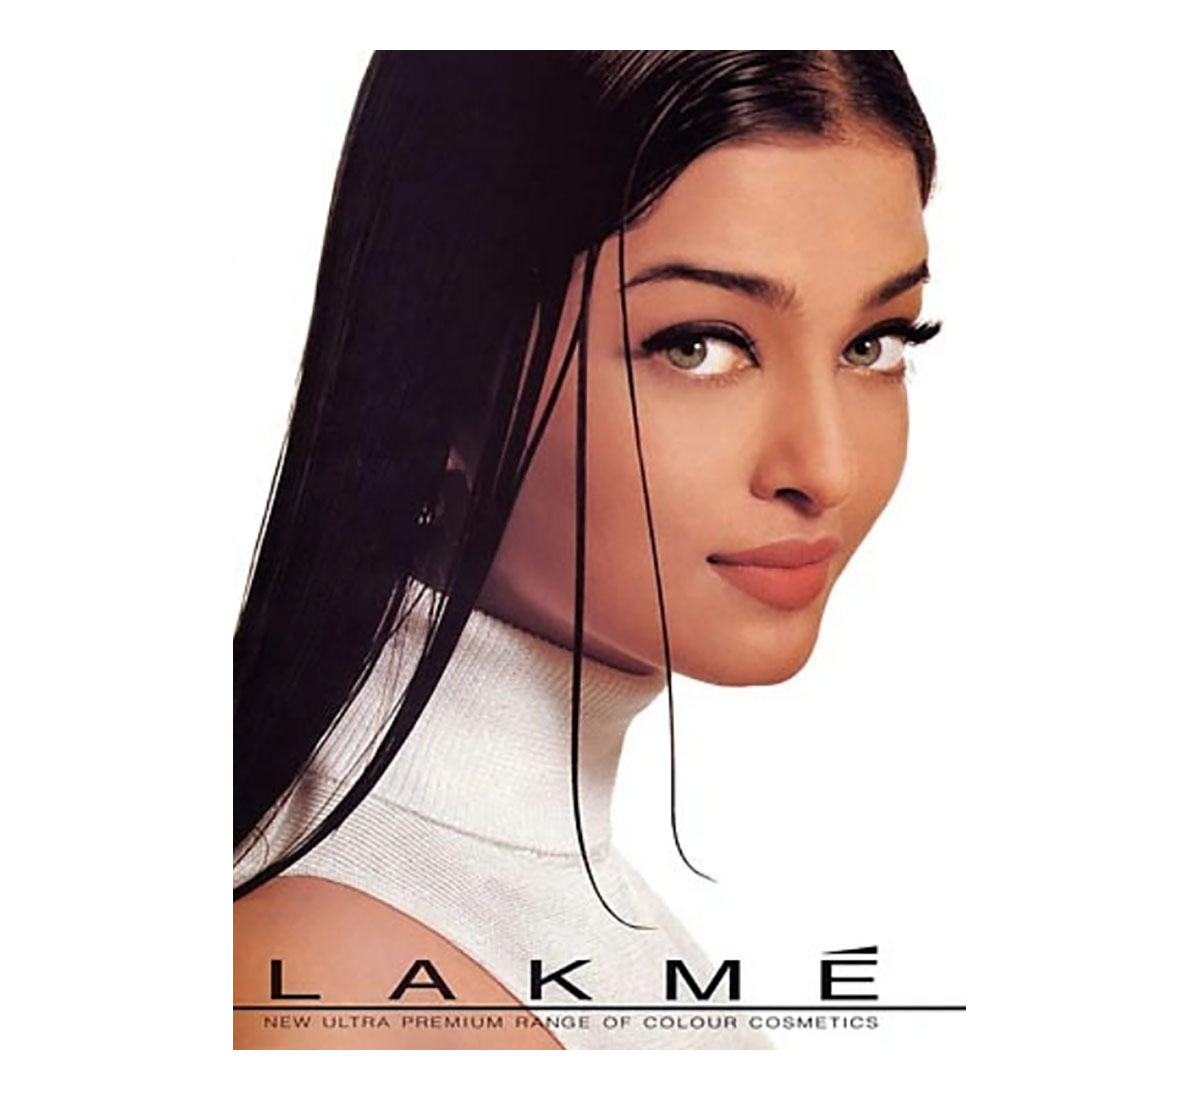 A woman (Aishwarya Rai) wearing a white sleeveless high-neck top with wet sleek hair is pictured from her right.